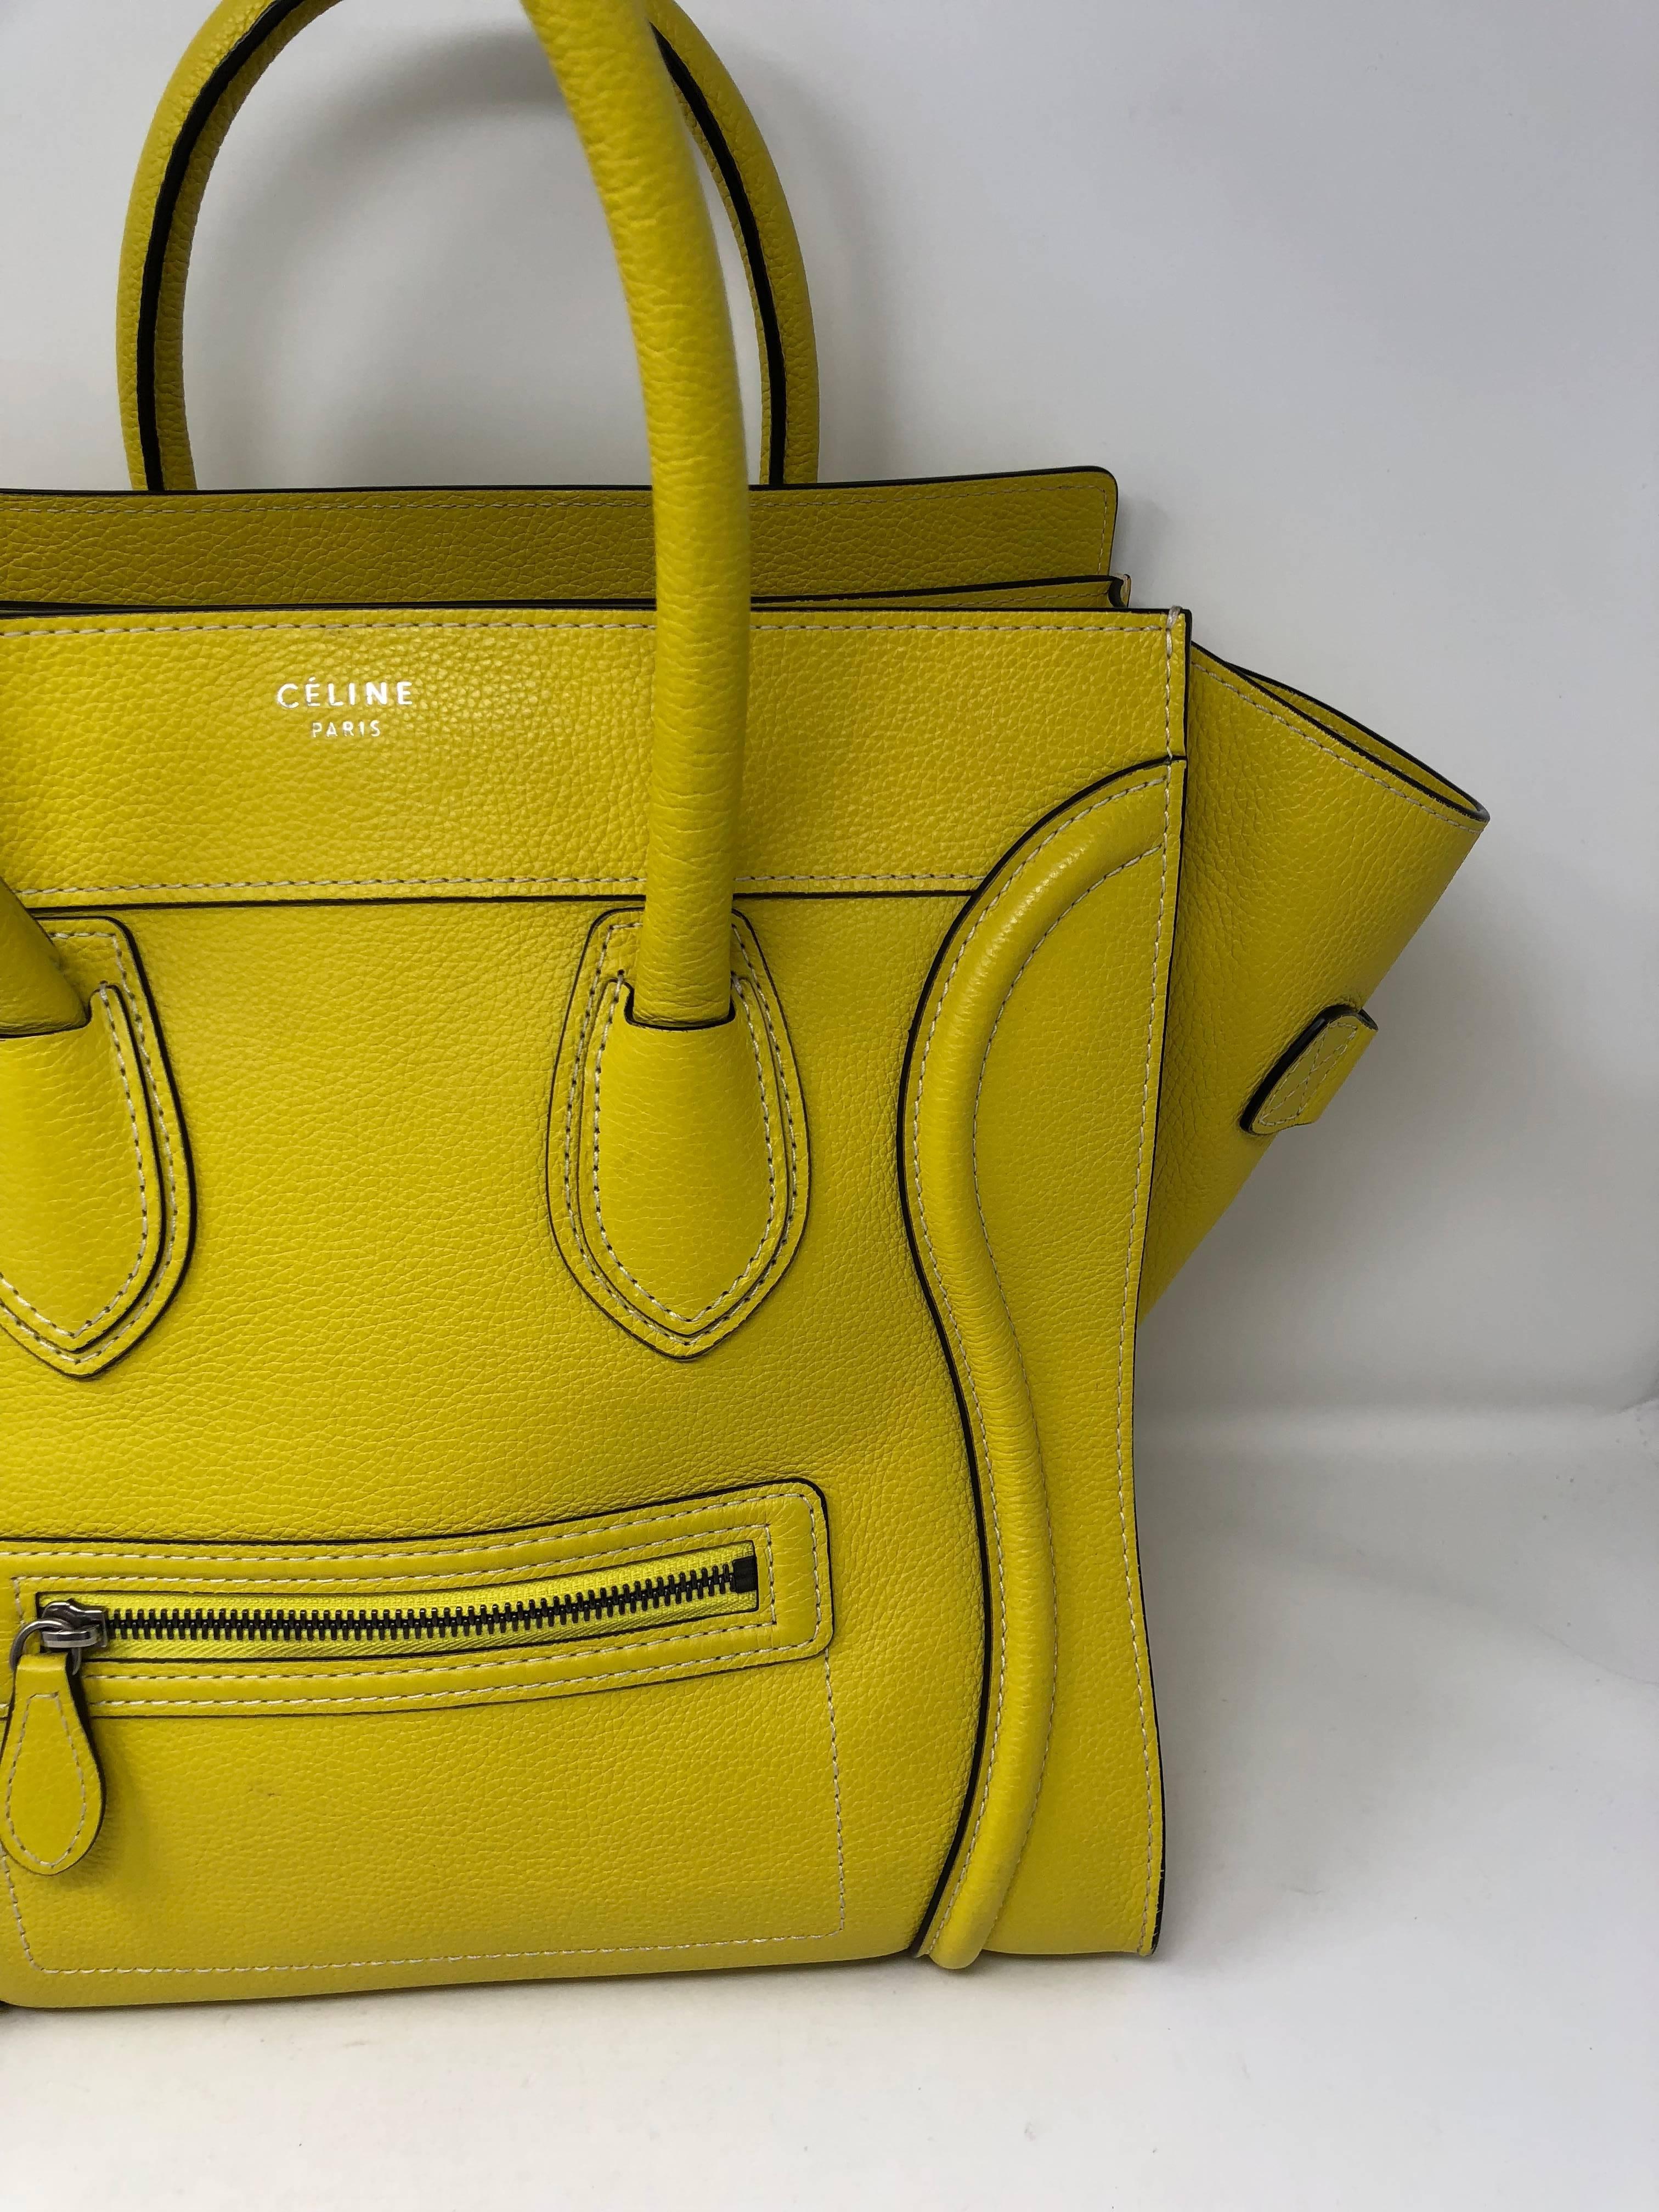 Celine lemon yellow Mini Luggage. Good condition has some wear on corners. Inside is clean. Guaranteed authentic. 